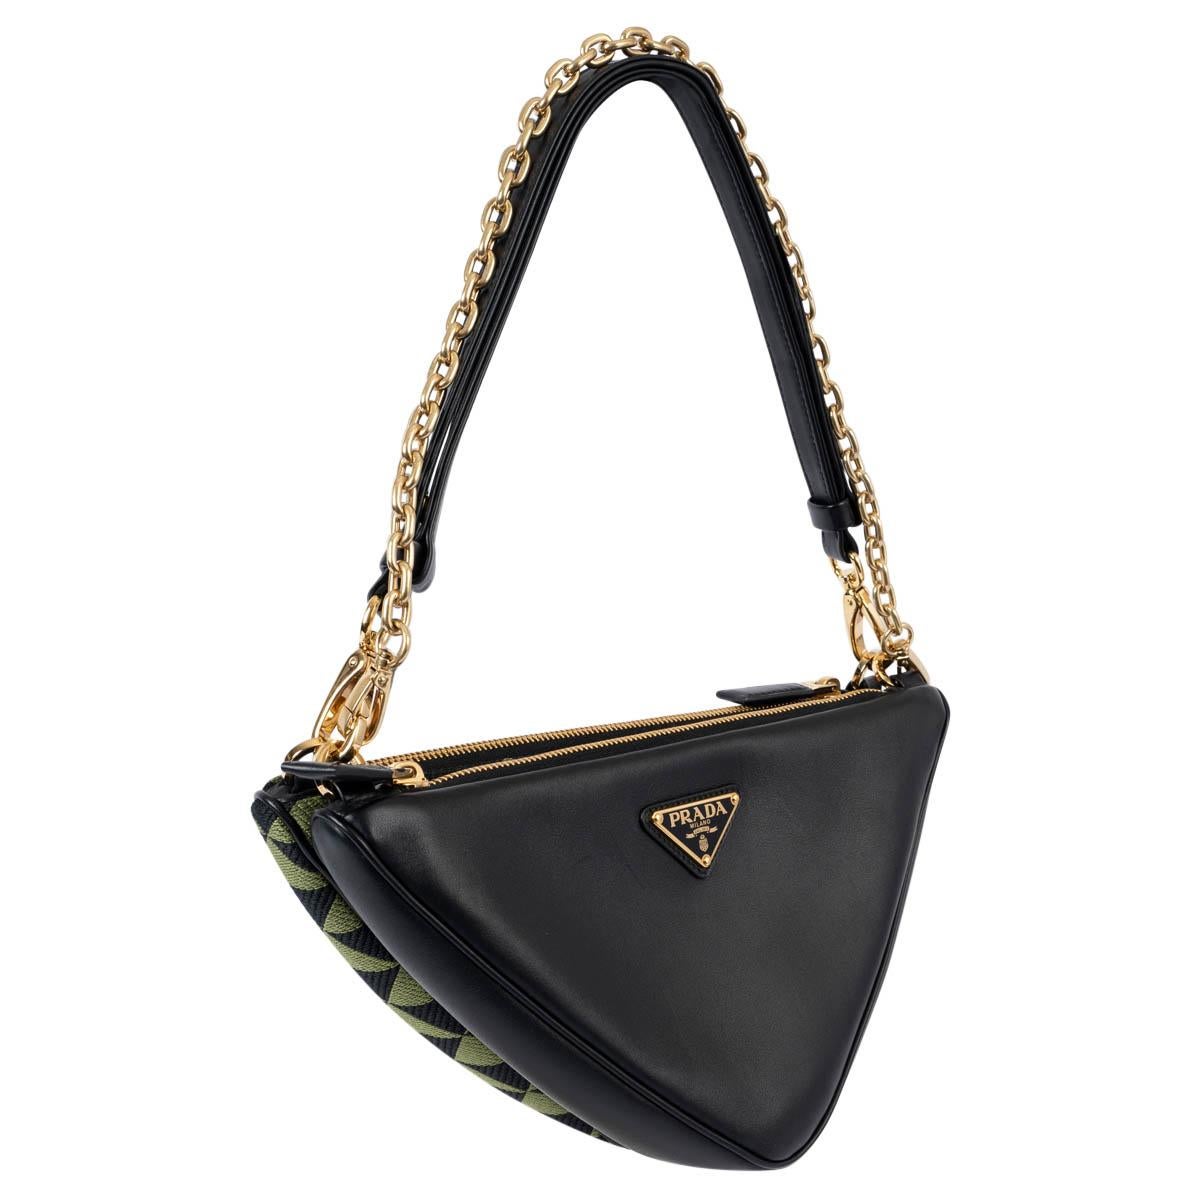 100% authentic Prada Triangle Mini double shoulder bag in triangular jacquard fabric Nero/Edera and black smooth lambskin featuring gold-tone hardware. The design features a detachable, adjustable chain and leather shoulder strap. Opens with a